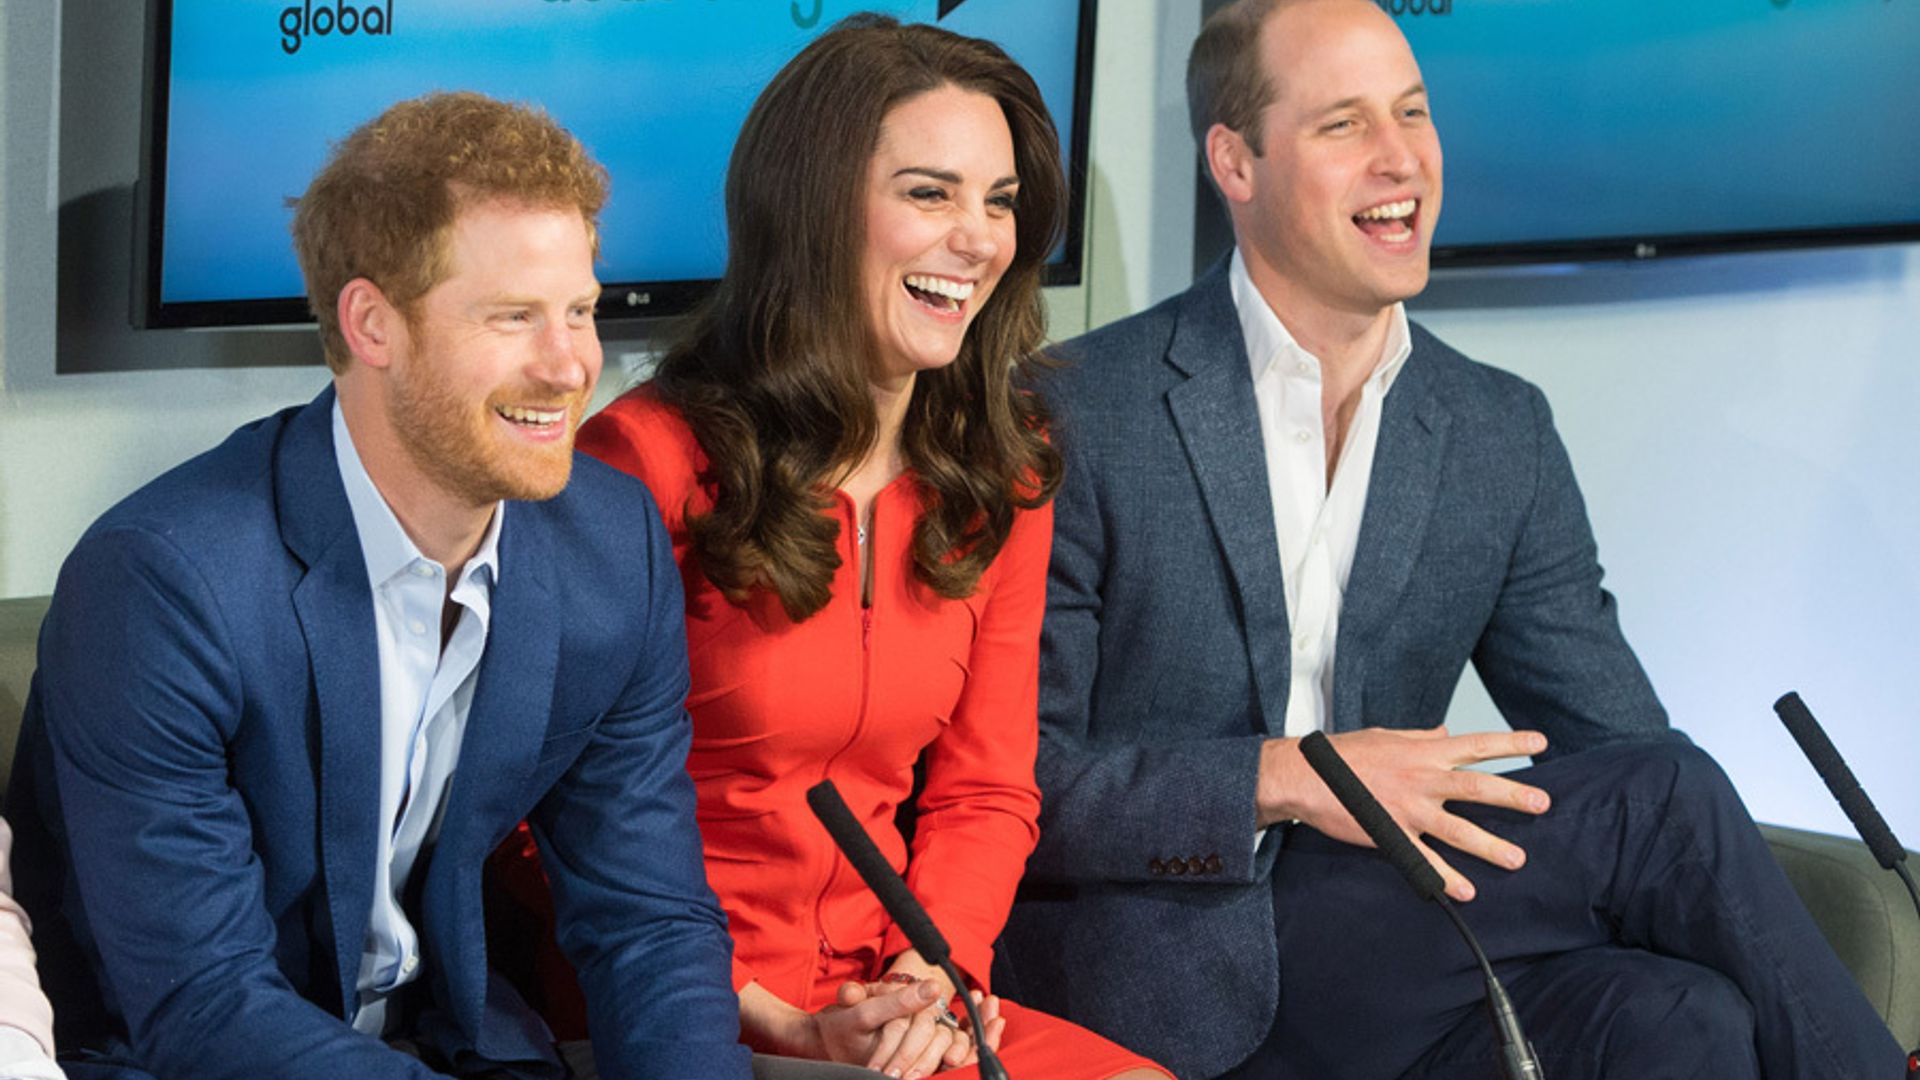 Prince William reveals the main reason he is happy his brother is engaged